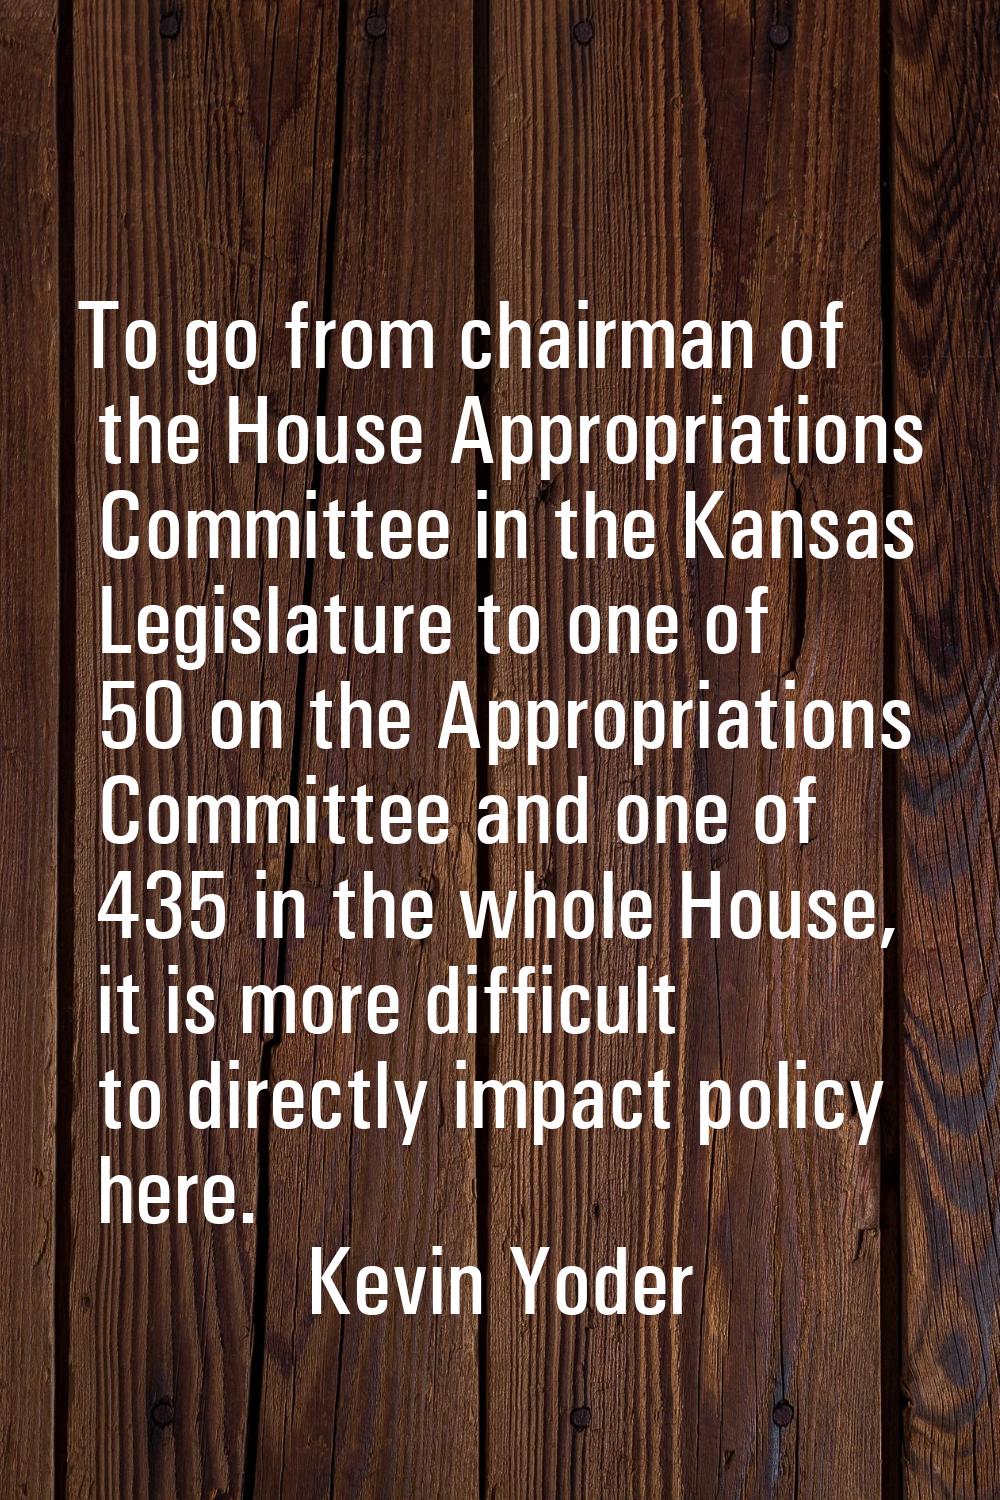 To go from chairman of the House Appropriations Committee in the Kansas Legislature to one of 50 on